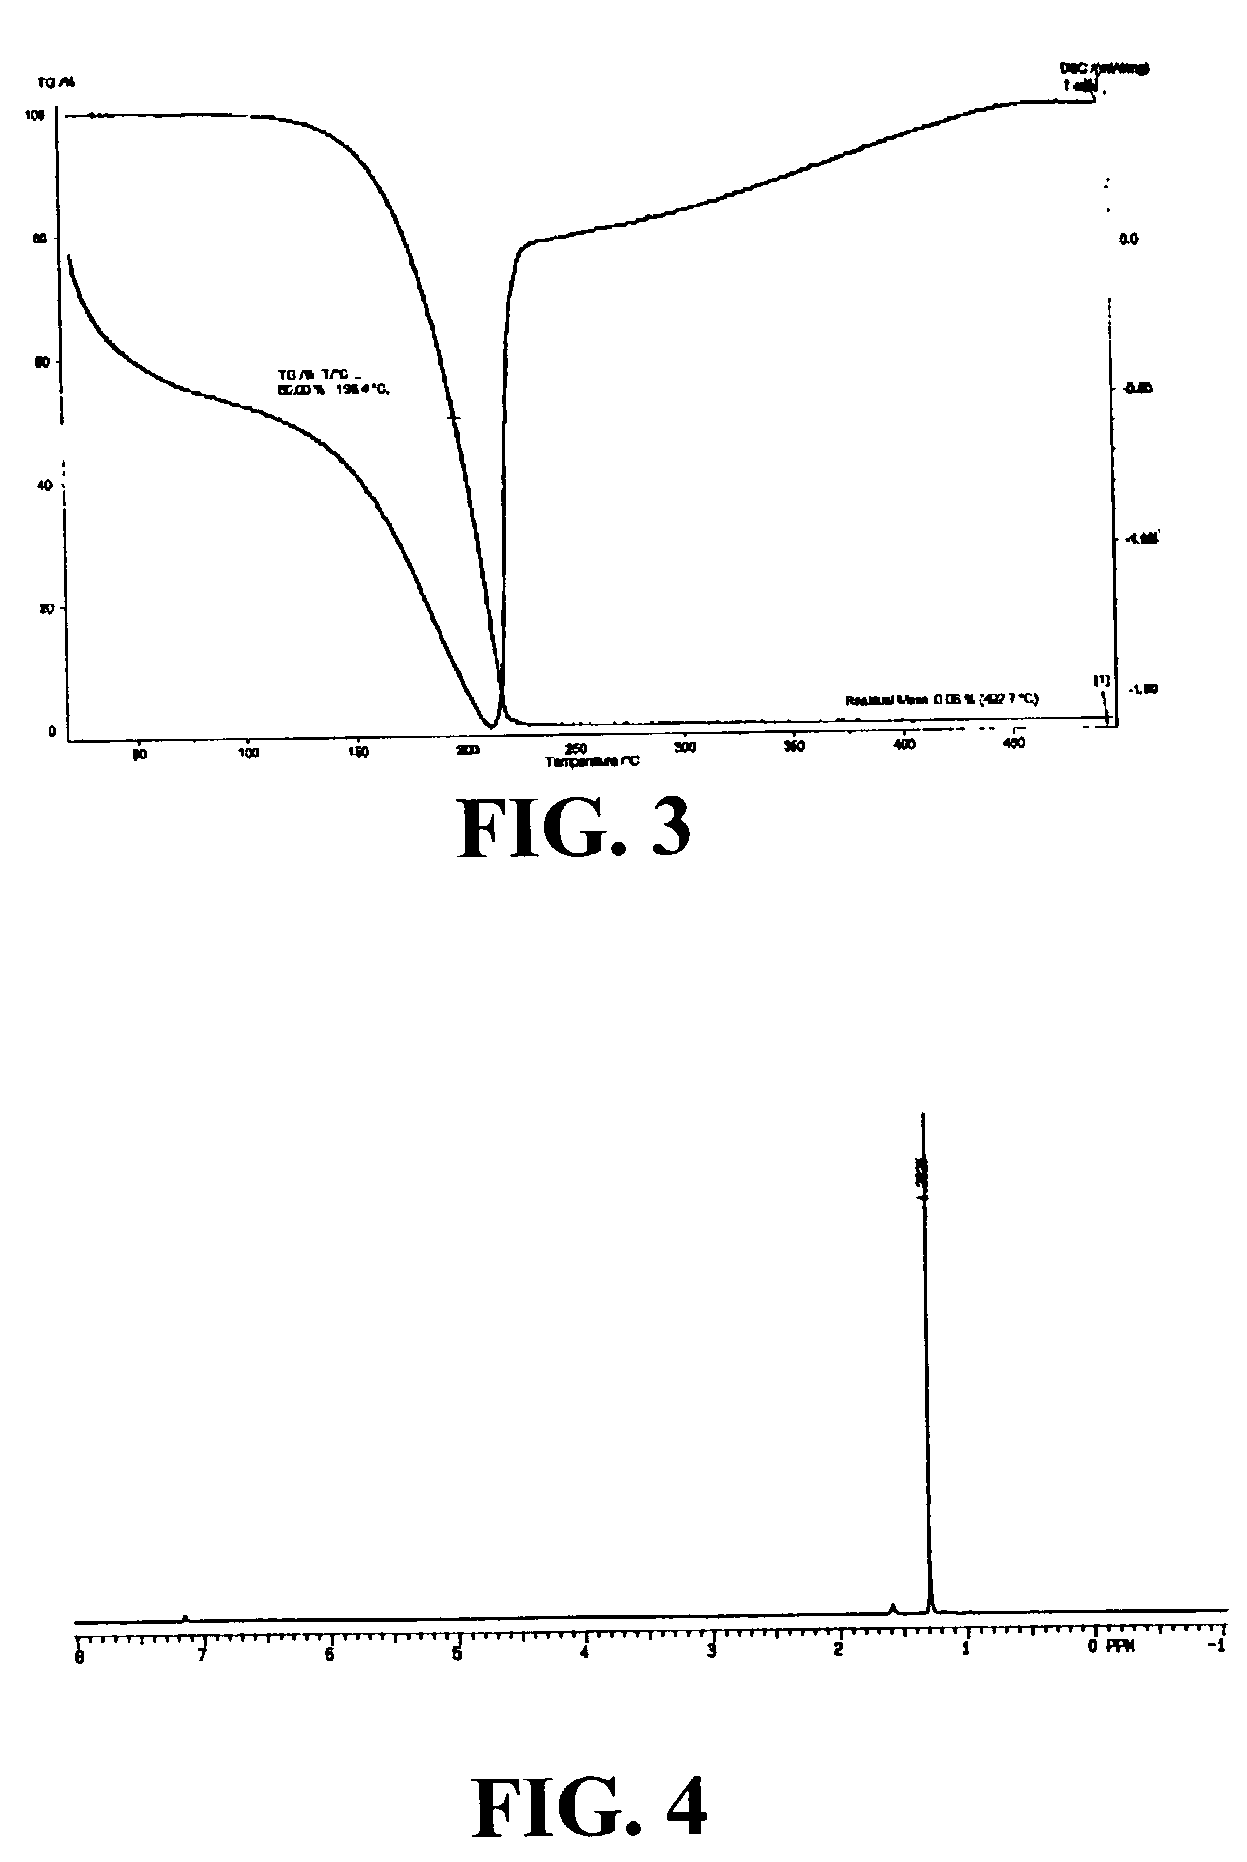 Composition and method for low temperature deposition of silicon-containing films such as films including silicon nitride, silicon dioxide and/or silicon-oxynitride